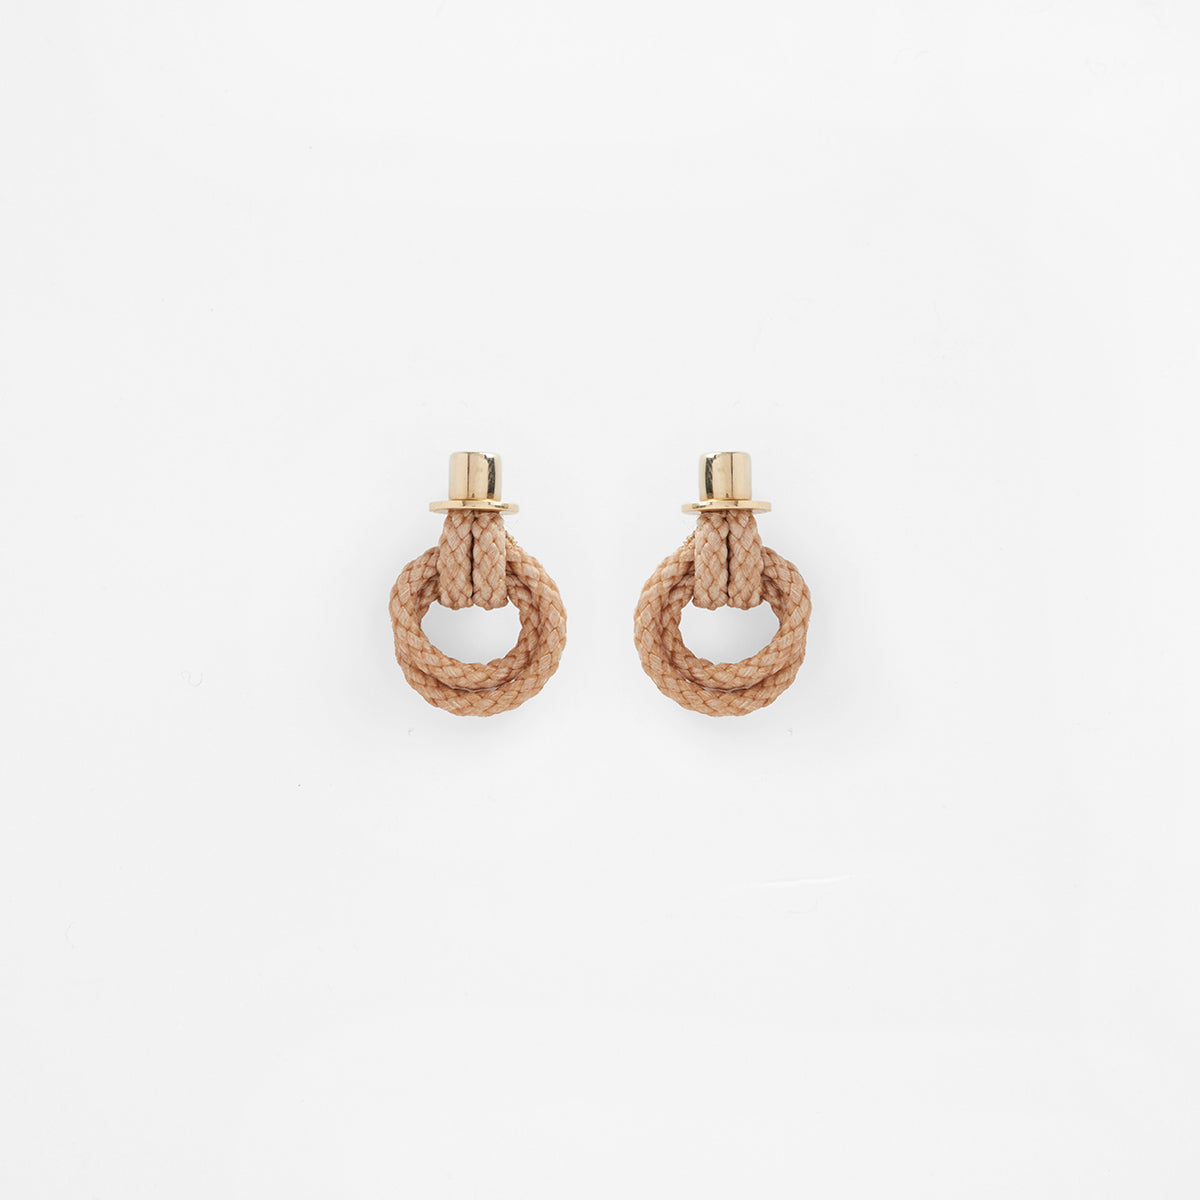 Pichulik | Derja Knot Earrings with Rope and Brass